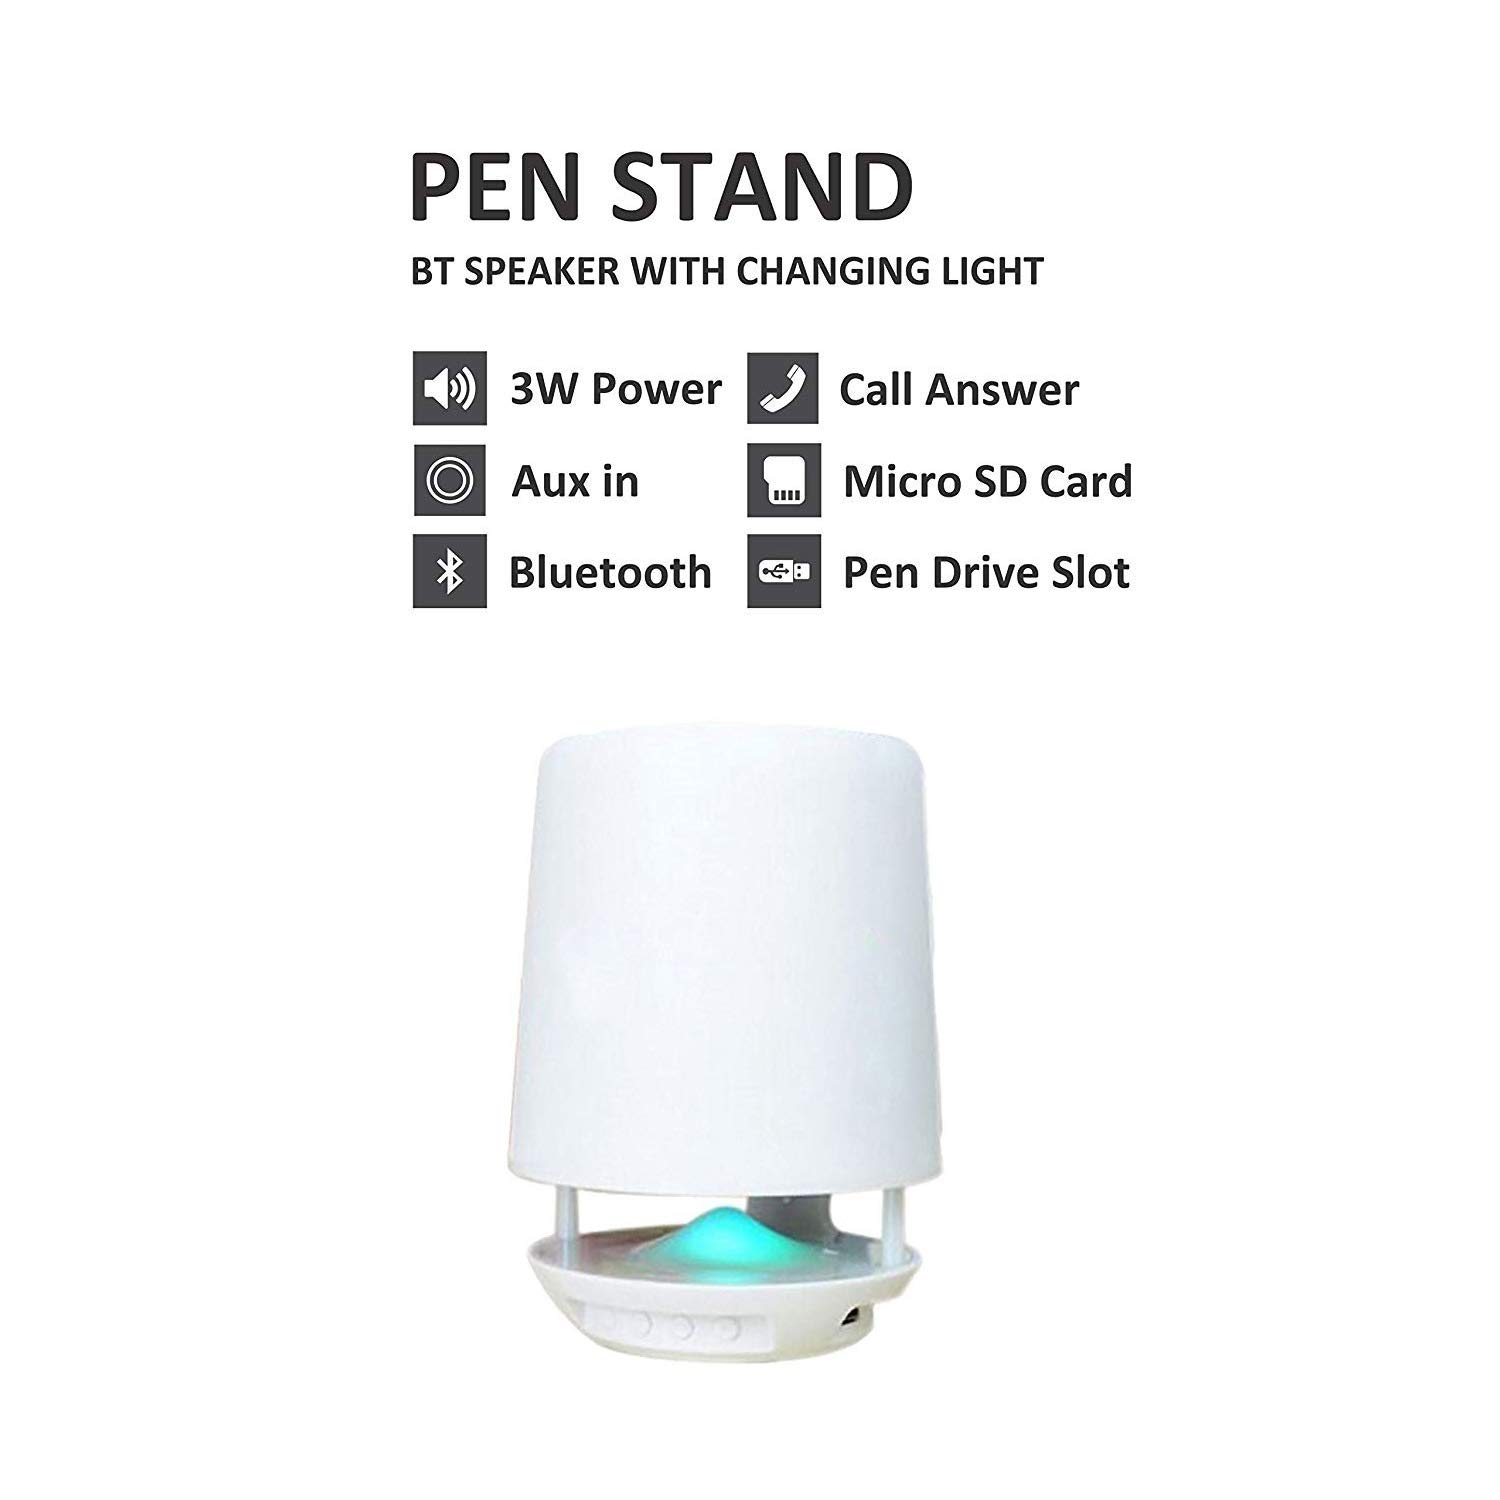 Pen Stand with Bluetooth Speaker, Multi functional Pen Stand with 3W Bluetooth Speaker, Supports AUX, USB Flash Drive, TF Card, Micro SD Card, which Changing Lights (White)